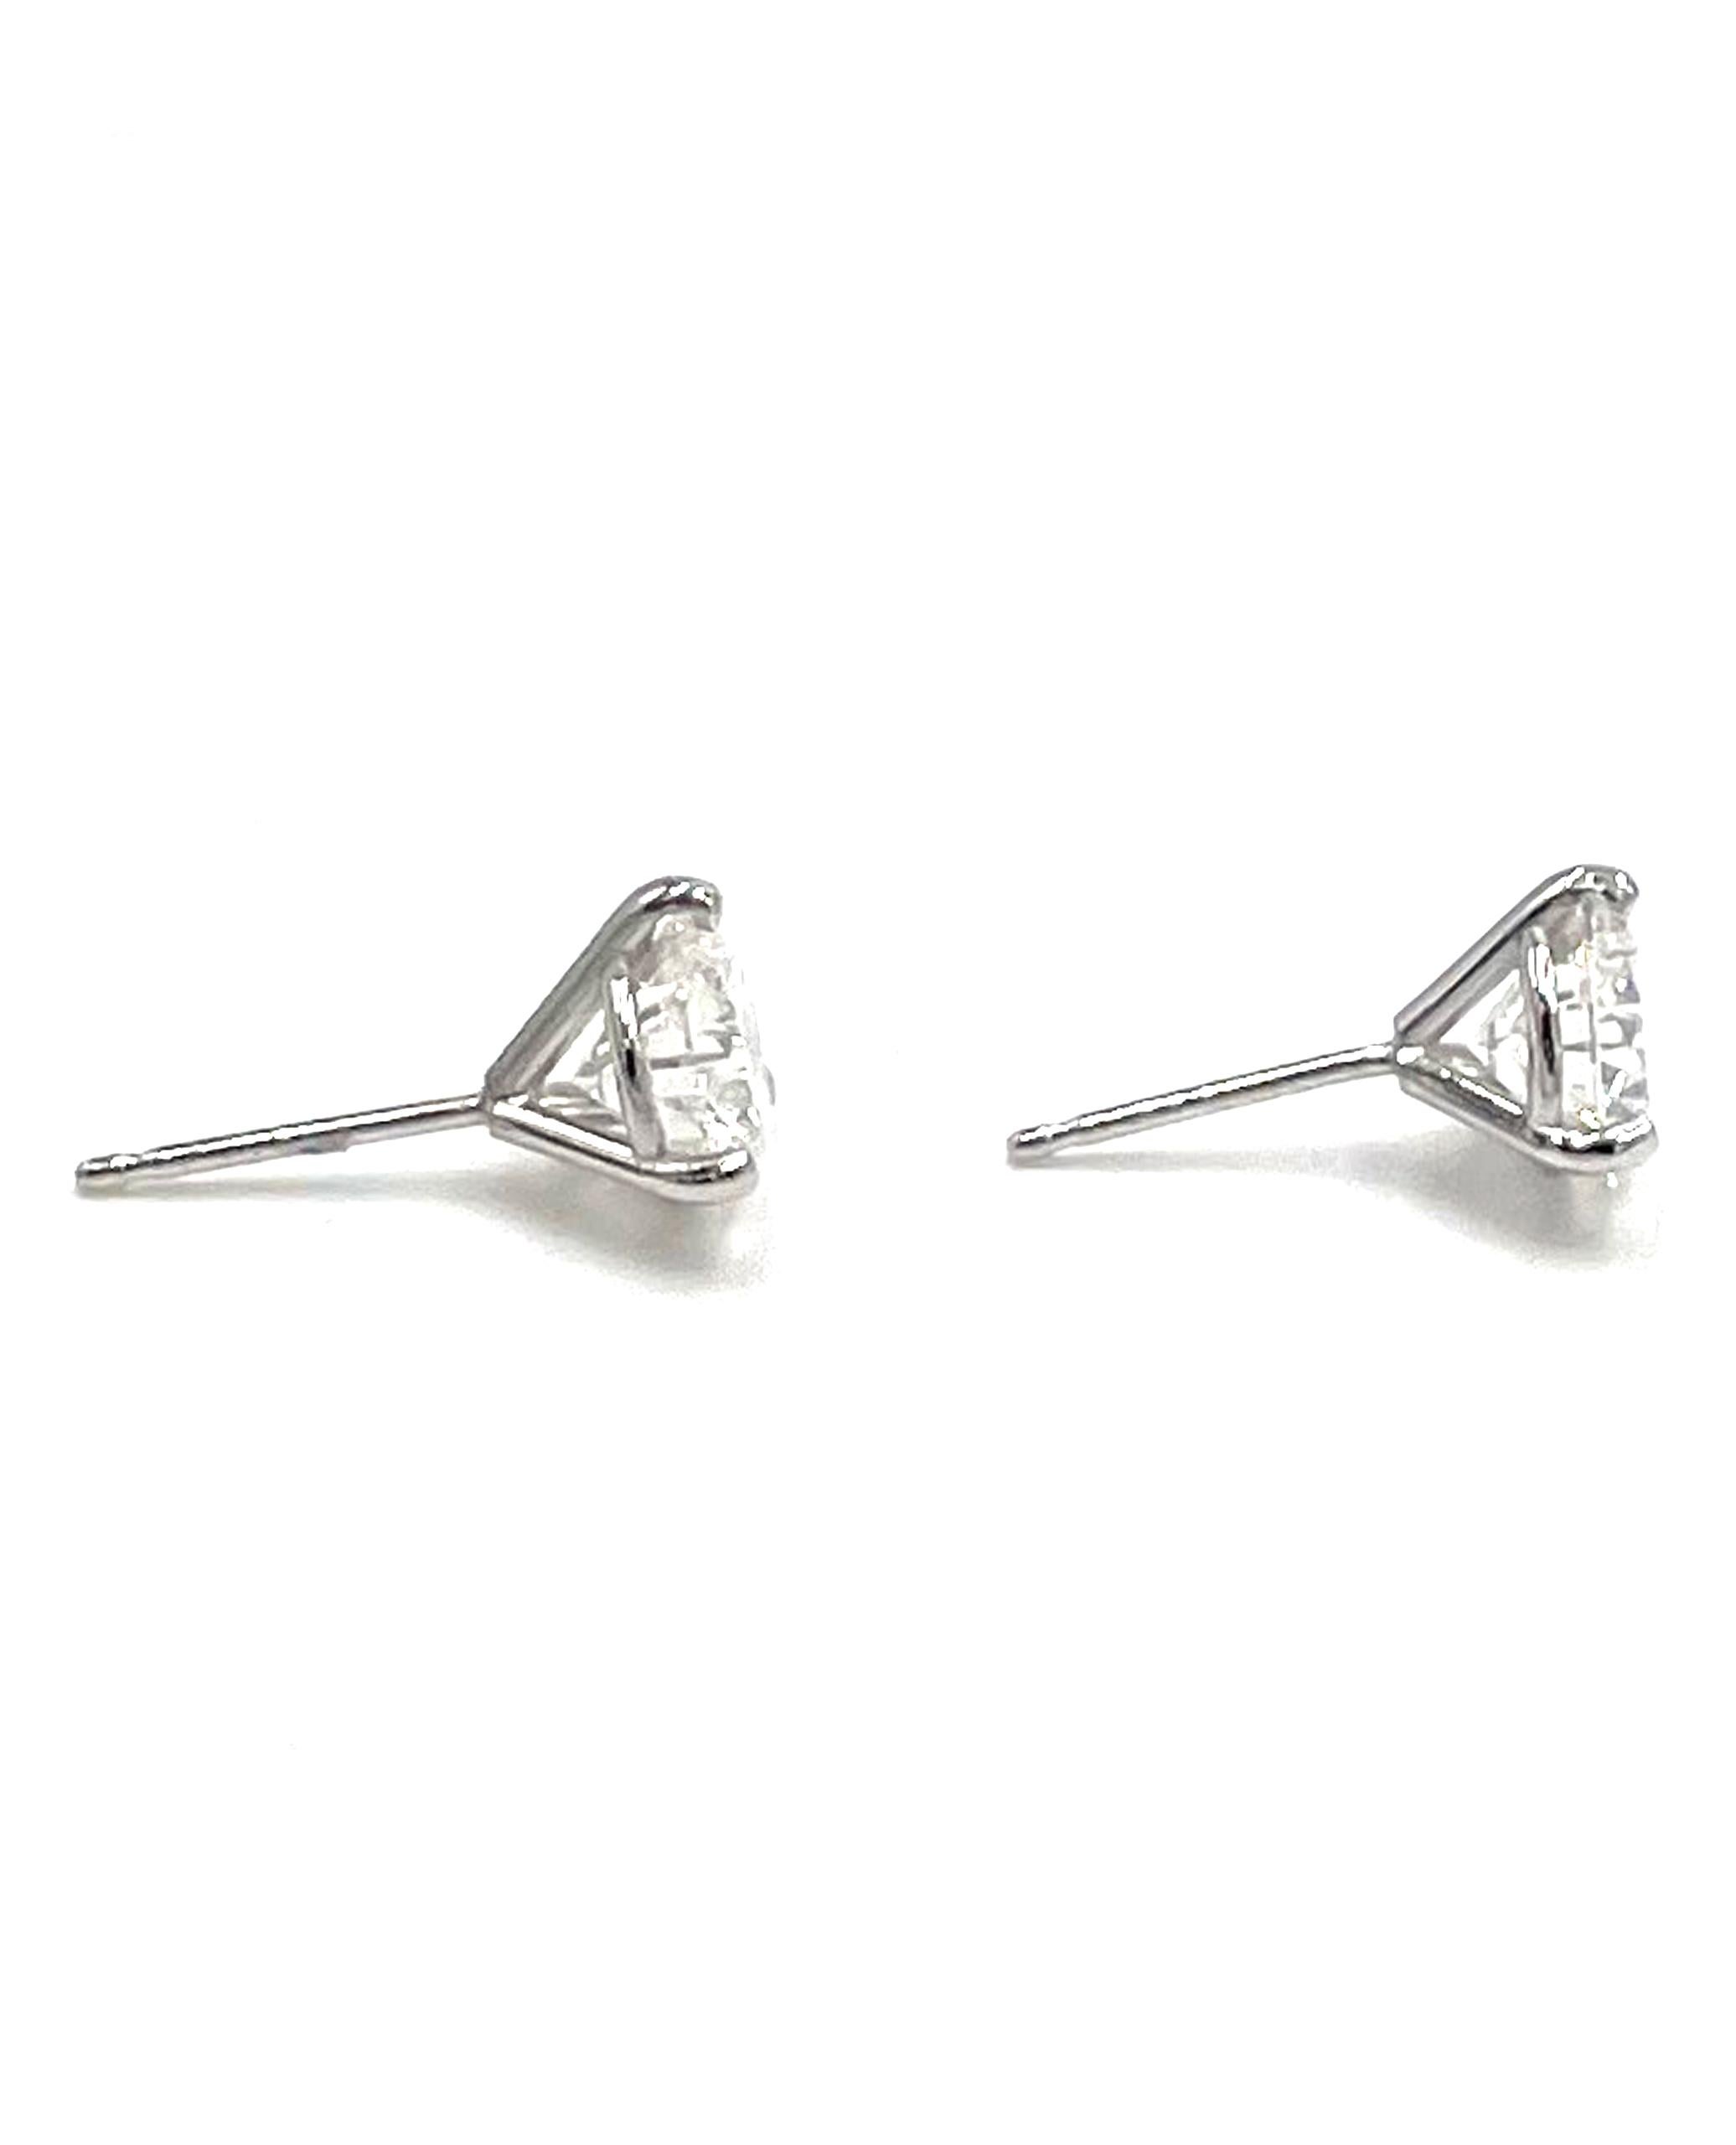 Contemporary Martini Set Diamond Studs, Gia Certified 2.59 Carats For Sale